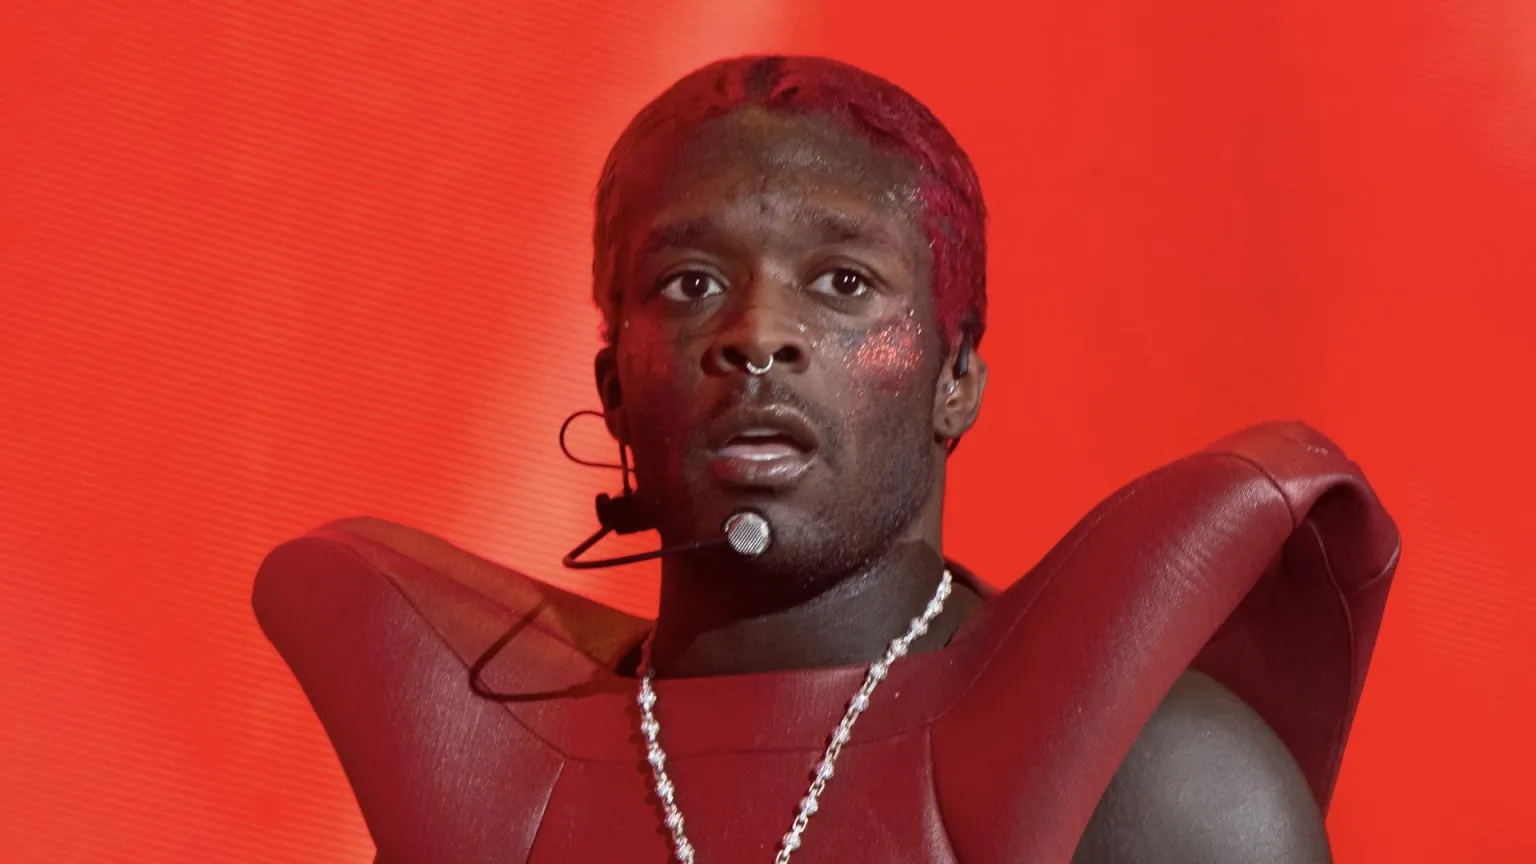 Lil Uzi Vert Once Again Tapped to Star in New Marc Jacobs Campaign